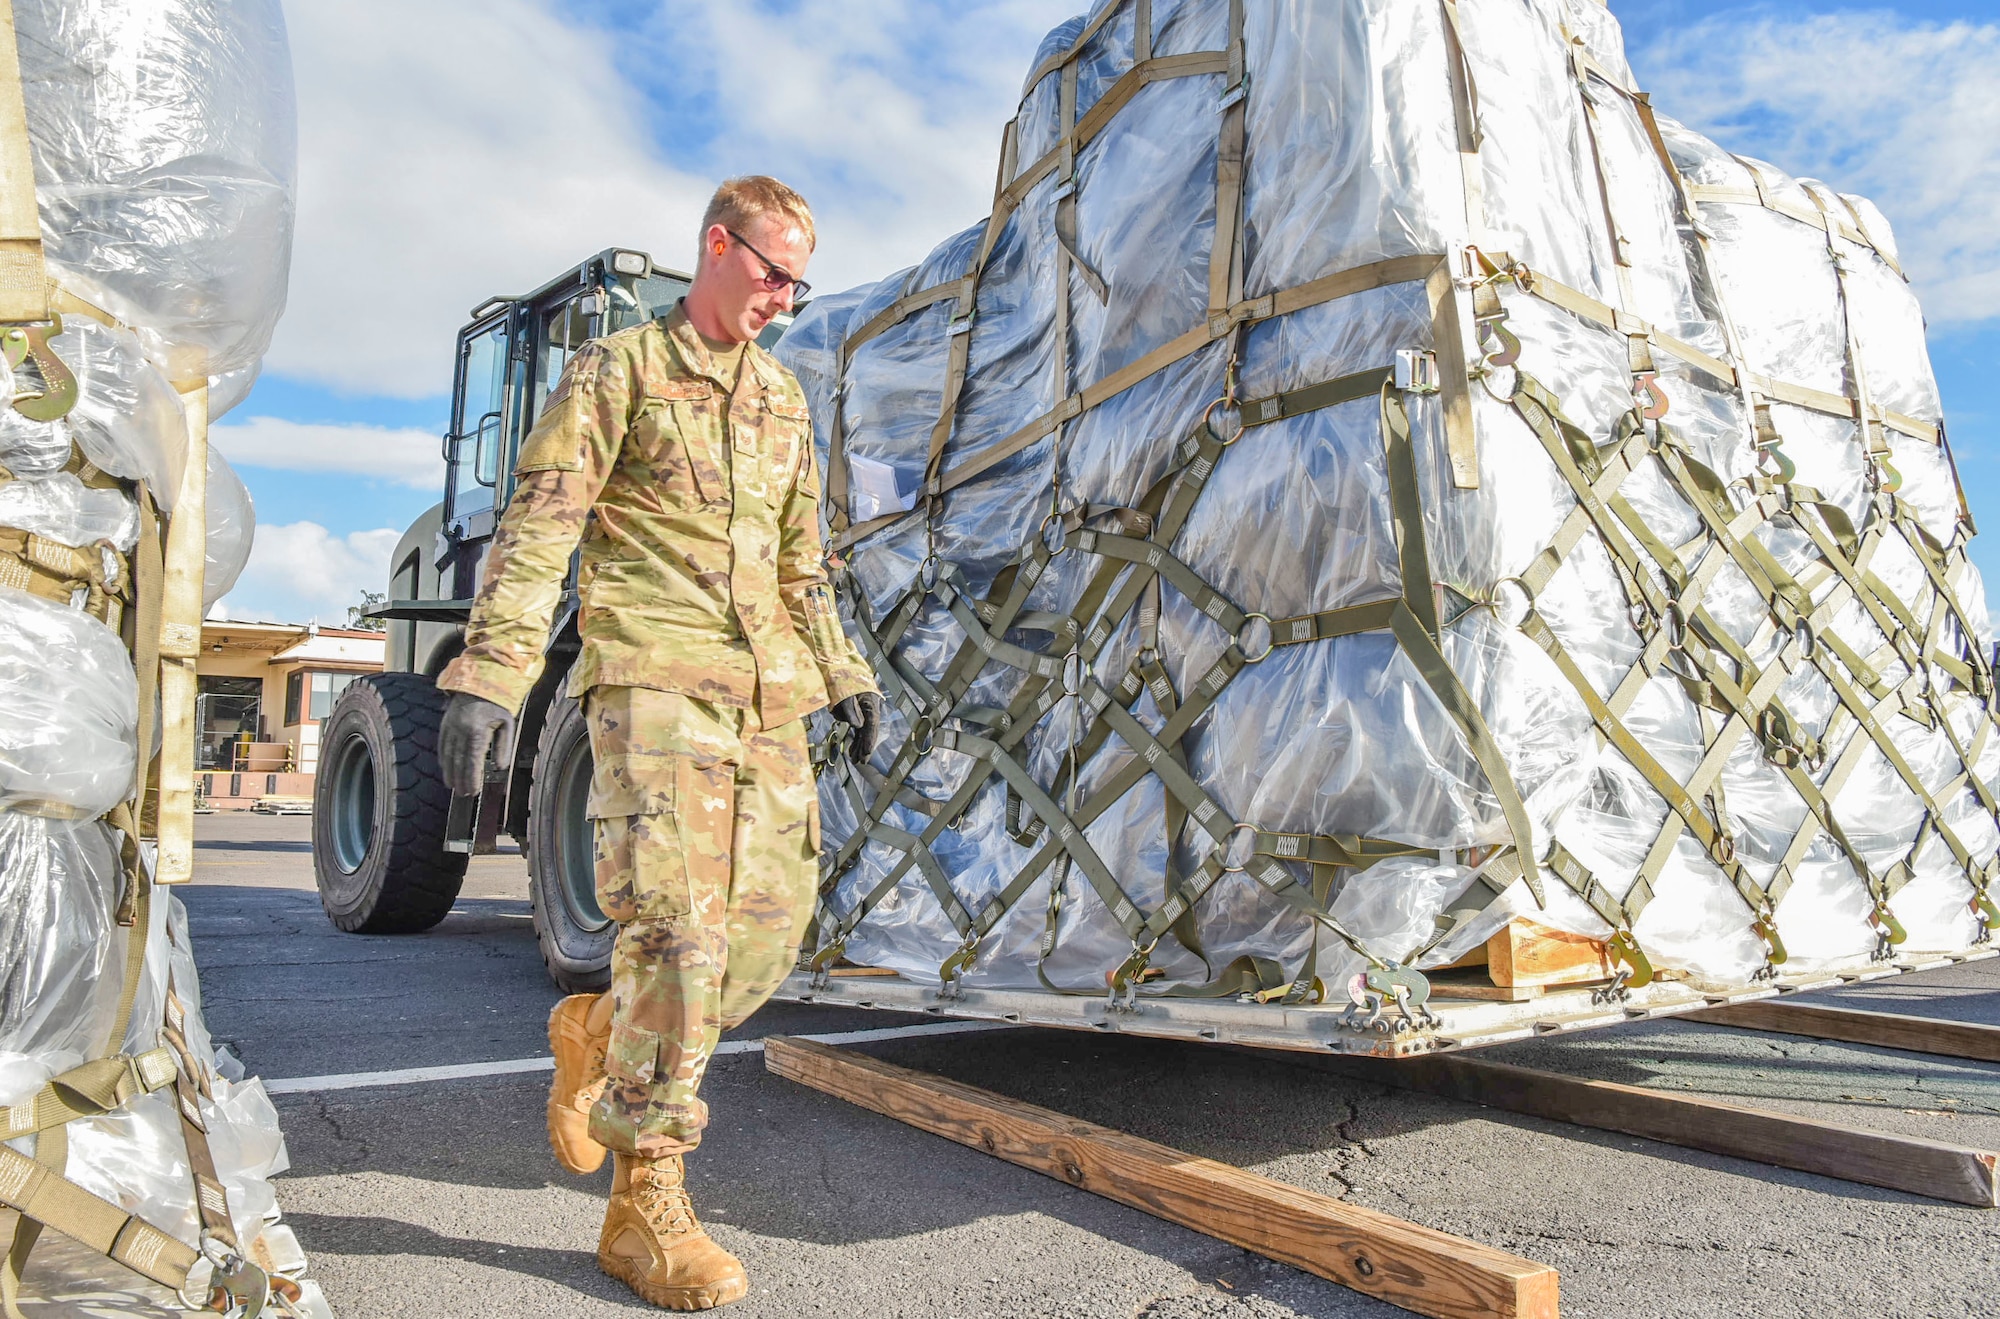 U.S. Air Force Staff Sgt. Austin Chambers, 647th Logistics Readiness Squadron NCOIC of air transportation function spots the forklift driver while properly placing dunnage within the cargo deployment function yard at Joint Base Pearl Harbor-Hickam, Hawaii, Dec. 22, 2021. The cargo was delivered by a C-5 Super Galaxy from Travis Air Force Base, carrying equipment to support the Granular Activated Carbon water filtration system and the water recovery efforts on Oahu.  (U.S. Air Force photo by Tech. Sgt. Anthony Nelson Jr.)